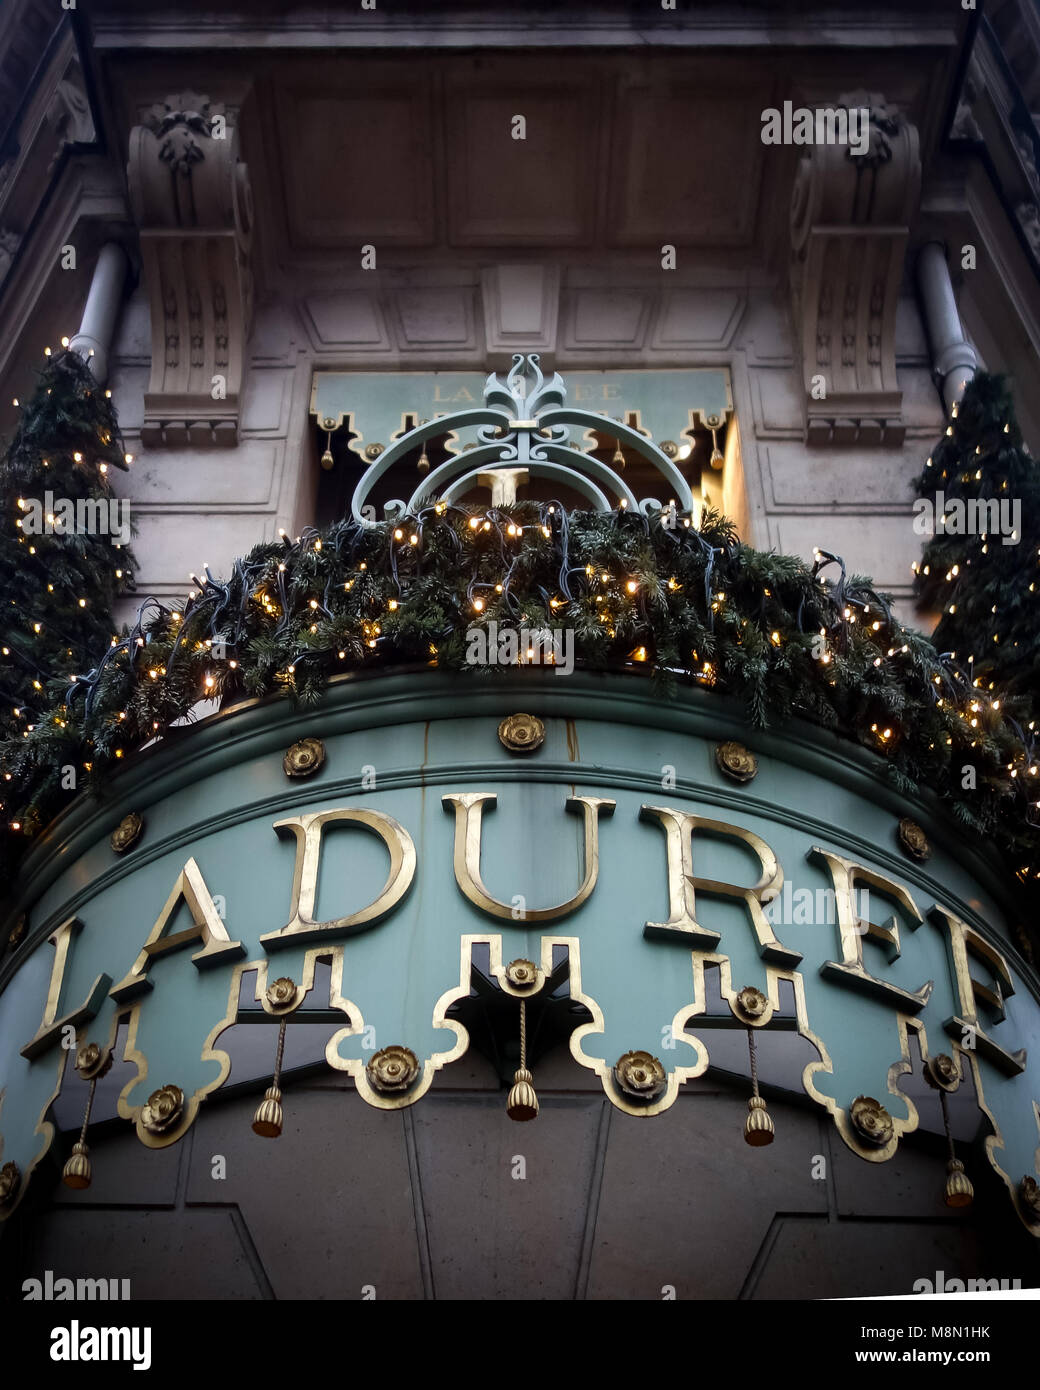 The Famous French Luxury Bakery And Sweets Shop La Duree On Champs Elysees  Avenue, Paris, France. Stock Photo, Picture and Royalty Free Image. Image  101633719.